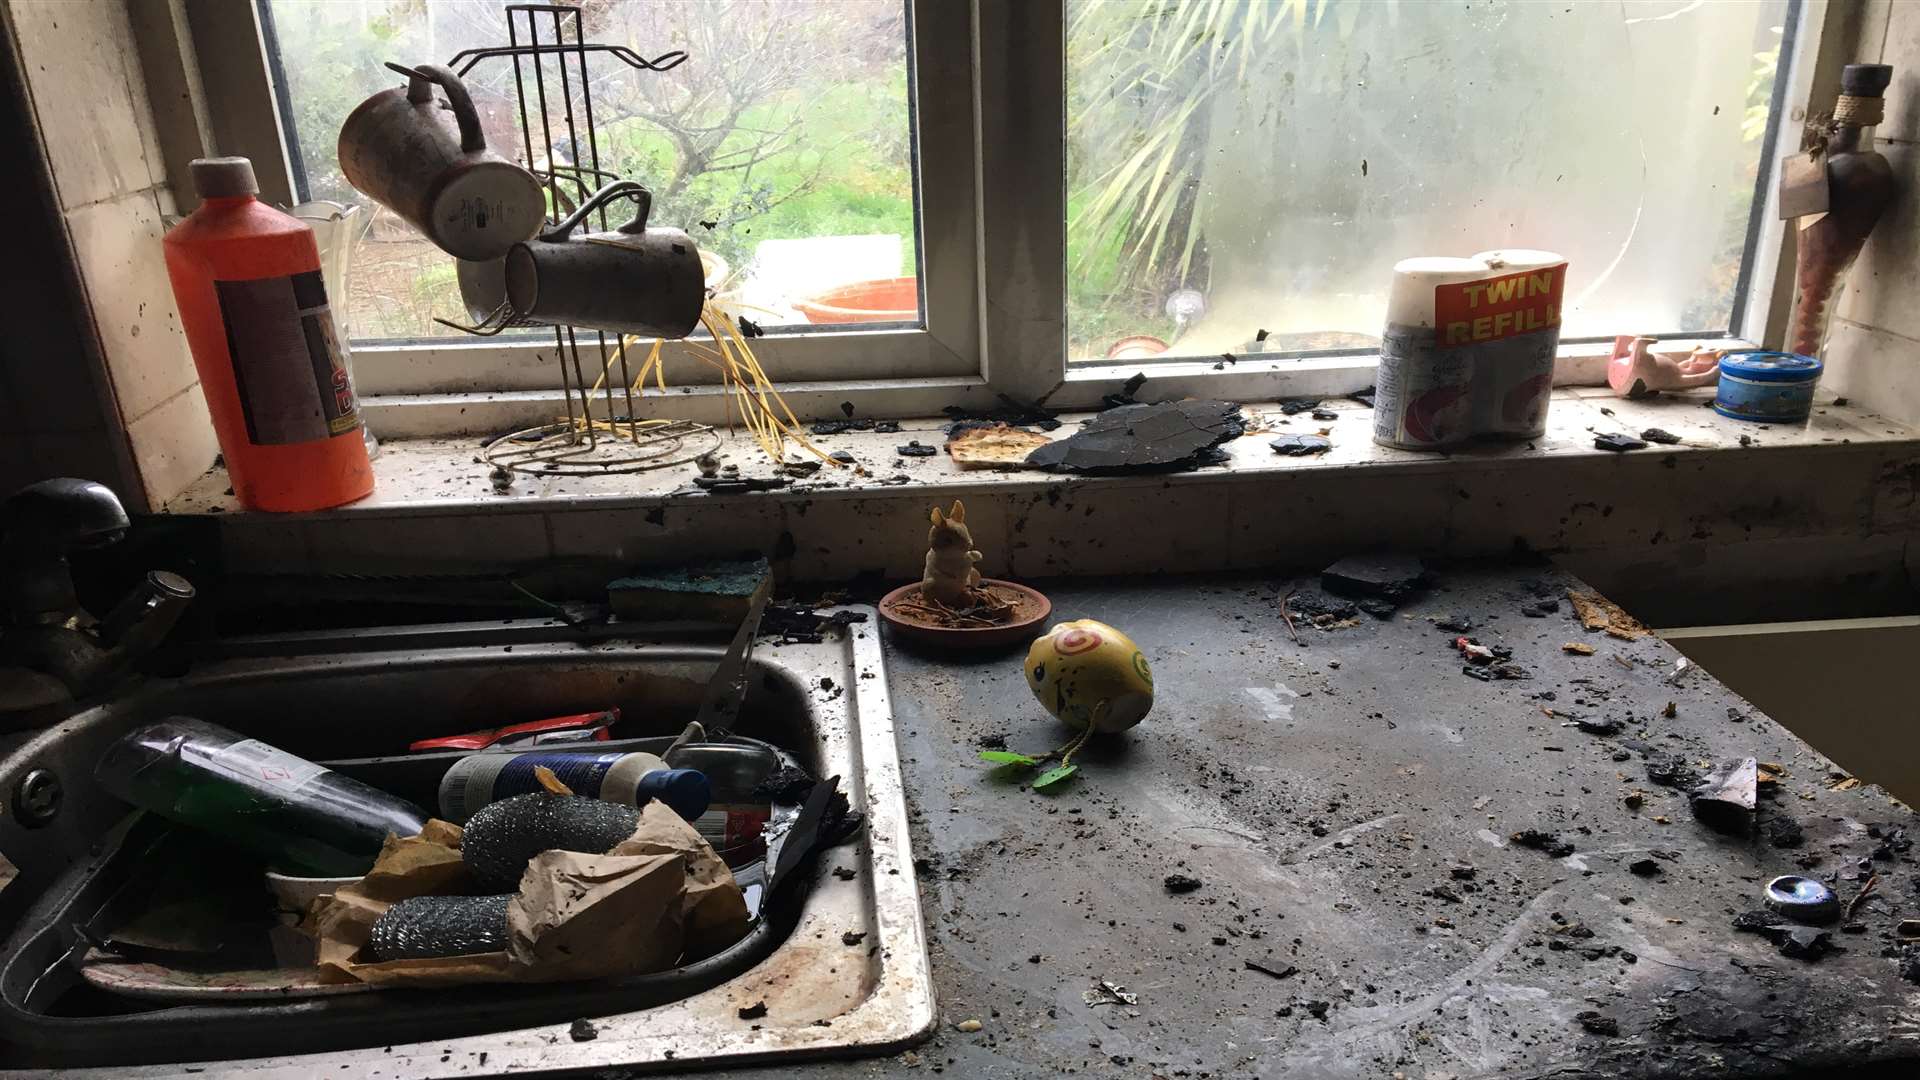 The fire has completely ruined the kitchen of Sharon Carr's home